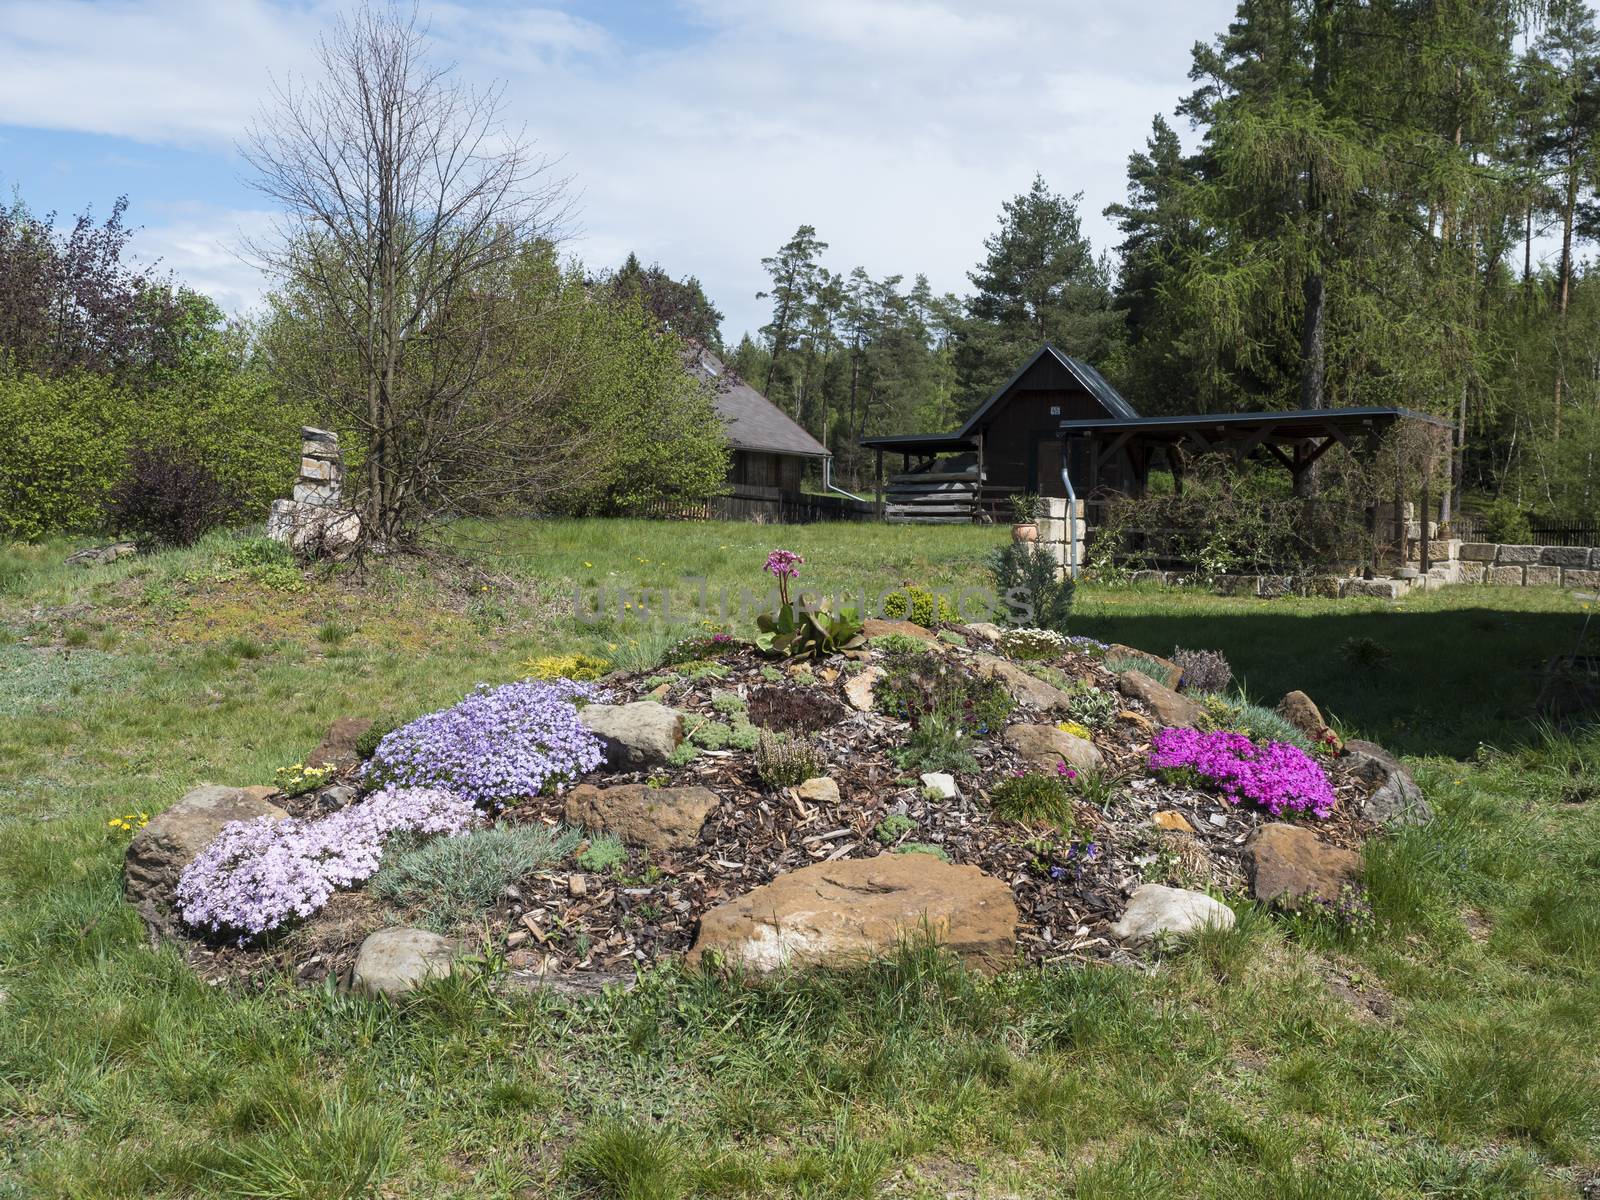 spring garden with beautiful rock garden in full bloom with pink Phlox, Armeria maritima, sea thrift, Bergenia or elephants ears, carnation and other colorful blooming flowers and gazebo or pergola.